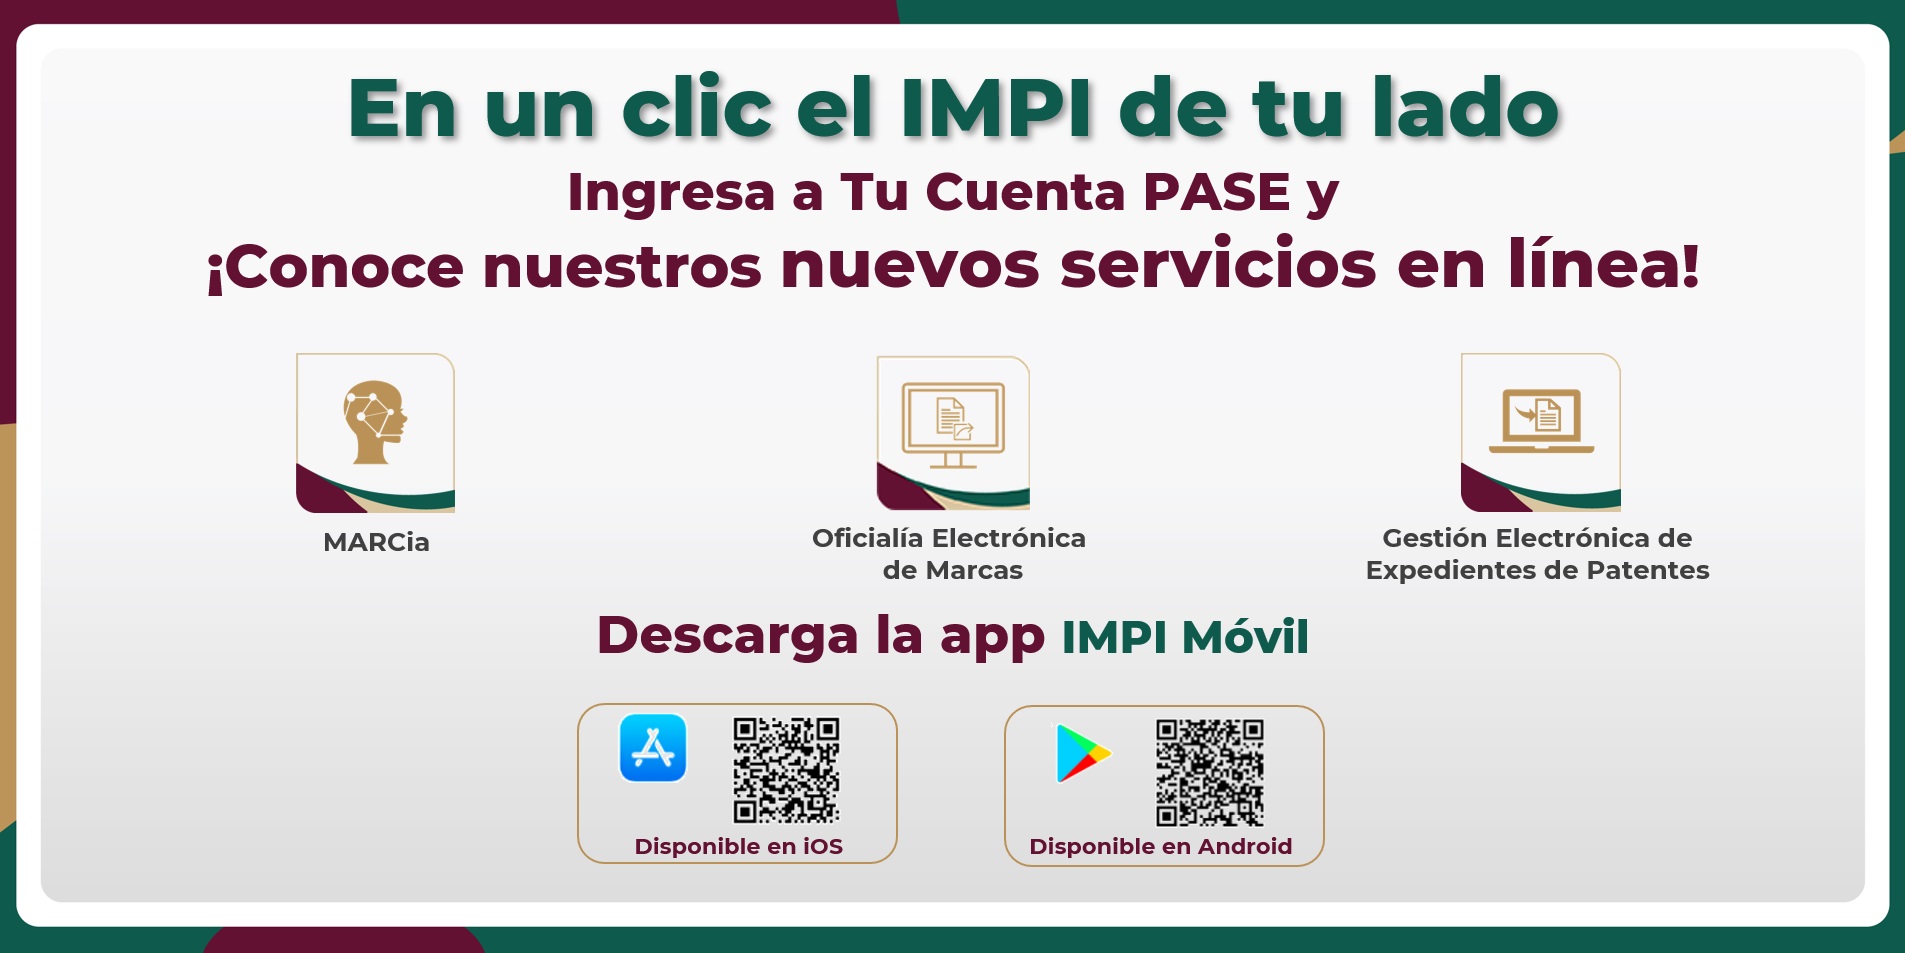 Mexican Industrial Protection Institute (IMPI) – FLC MEXICAN LEGAL  CONSULTANT